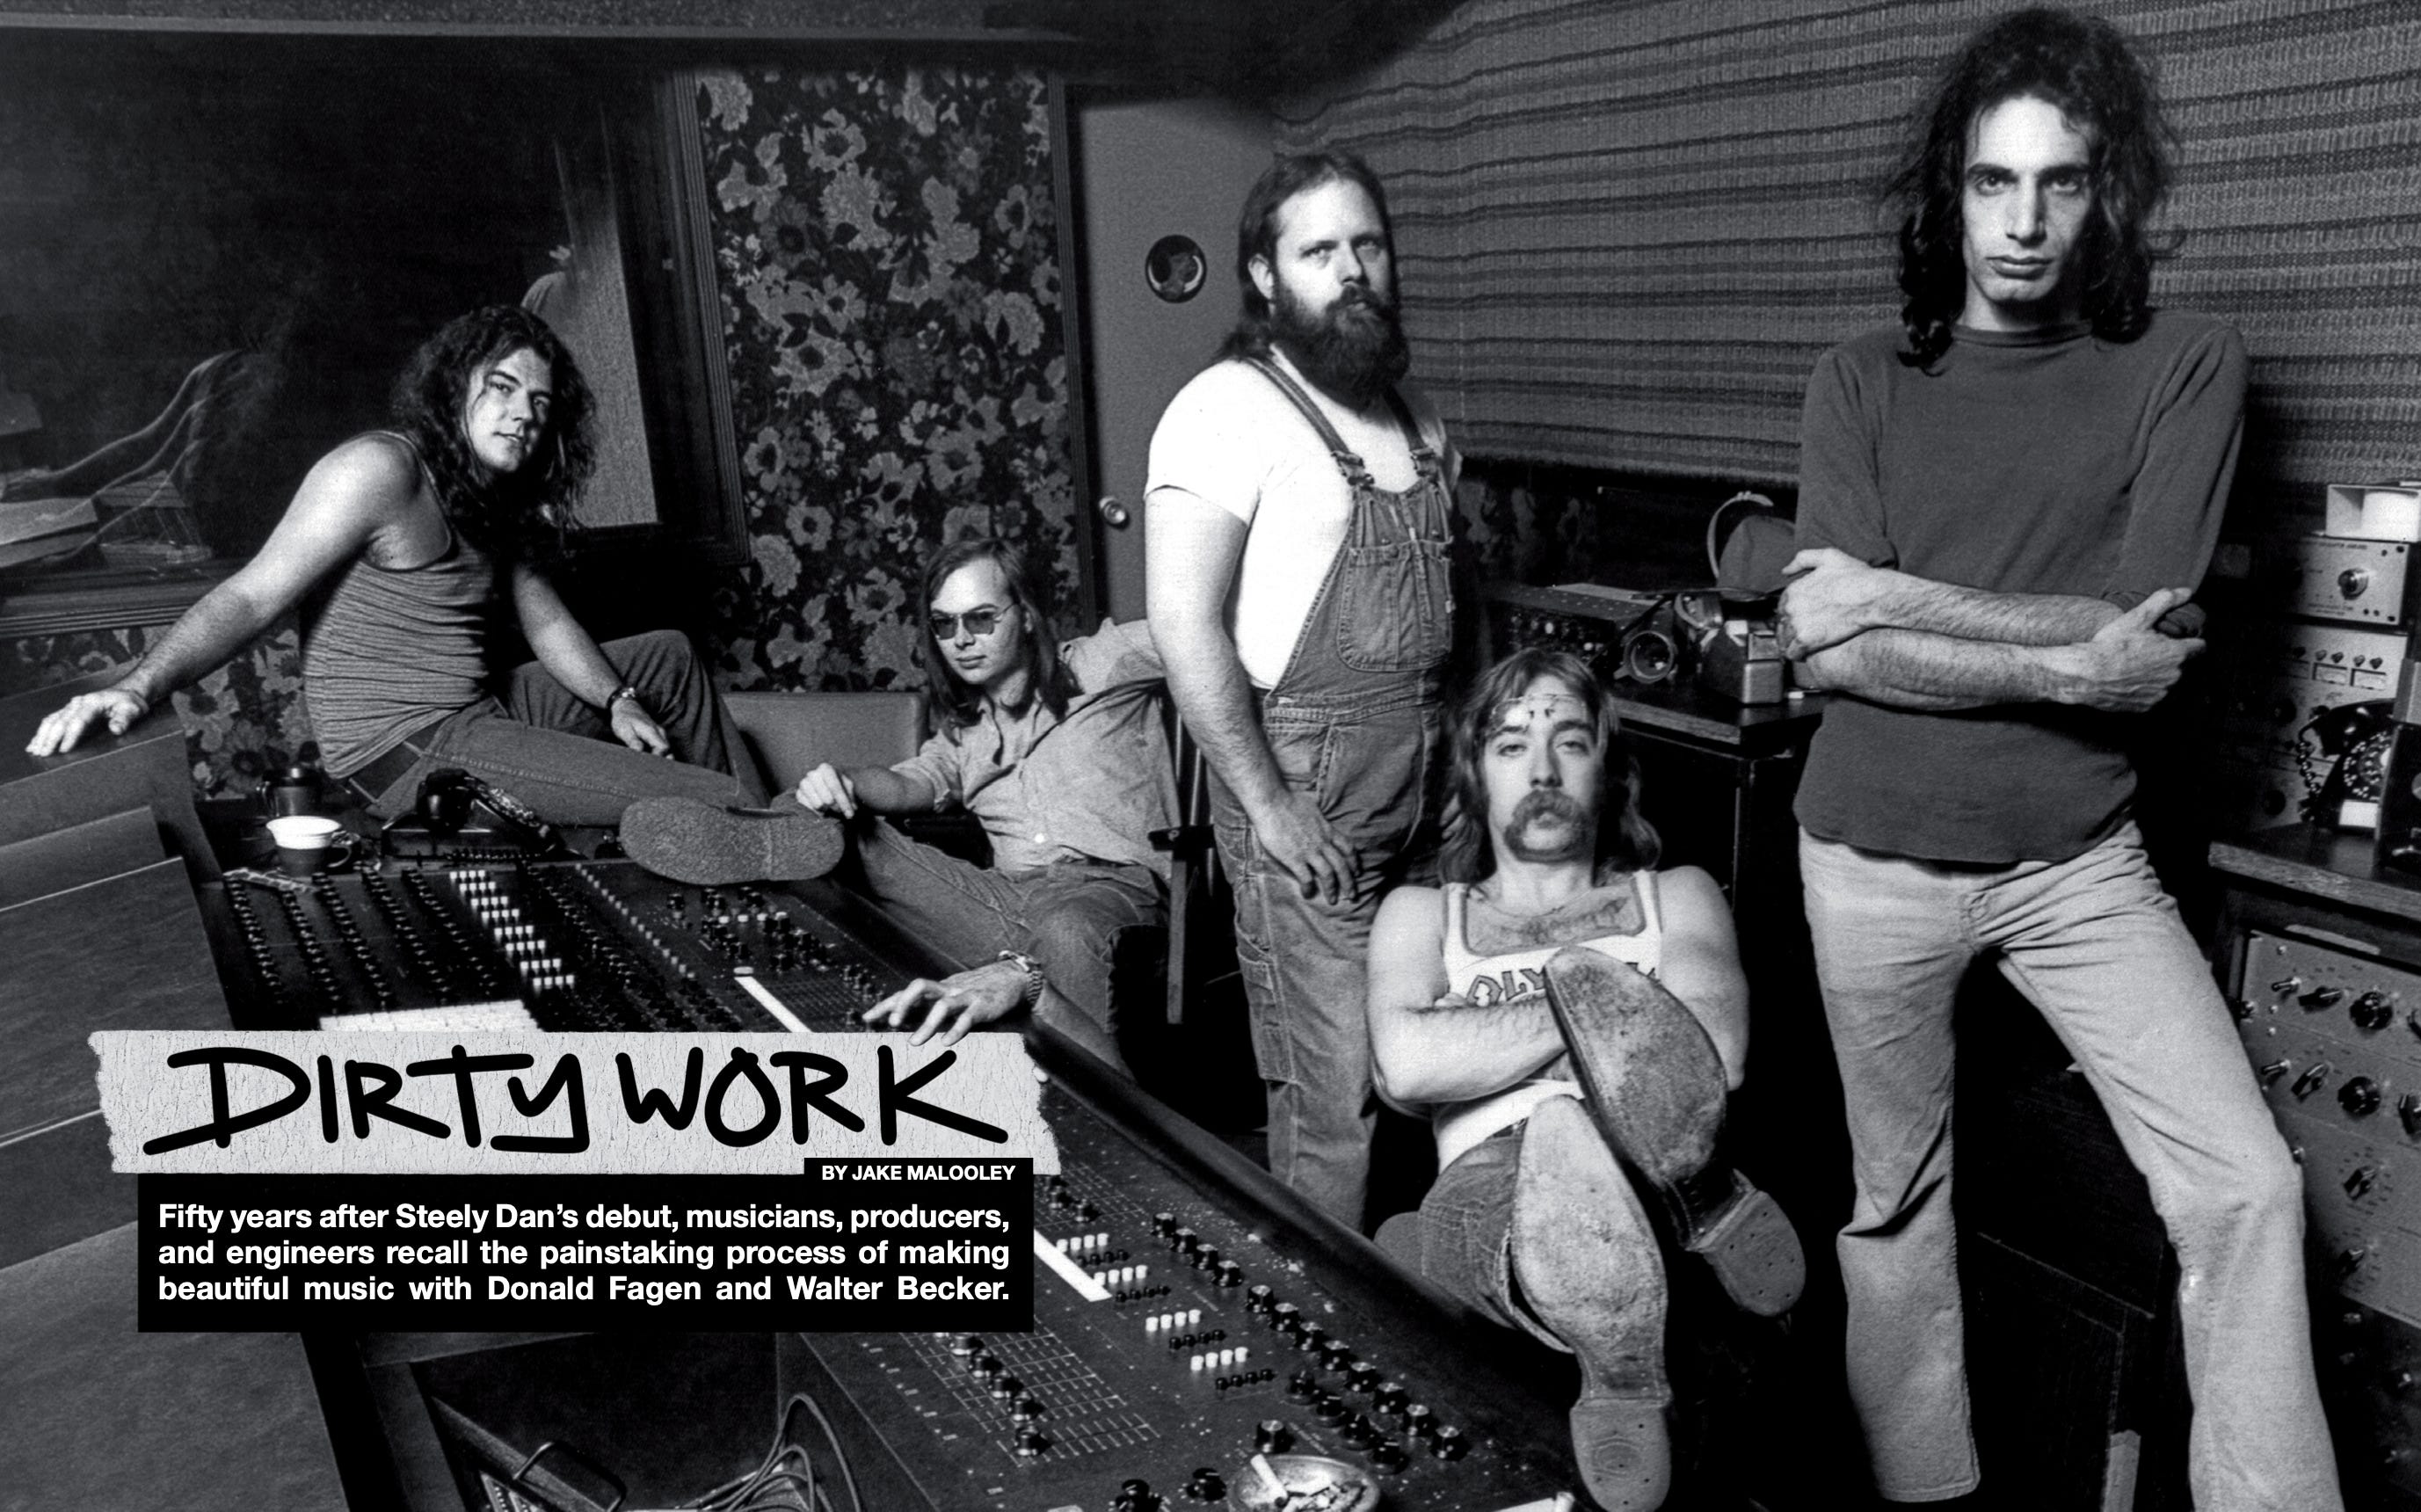 Dirty Work: The Complete Oral History of Recording with Steely Dan